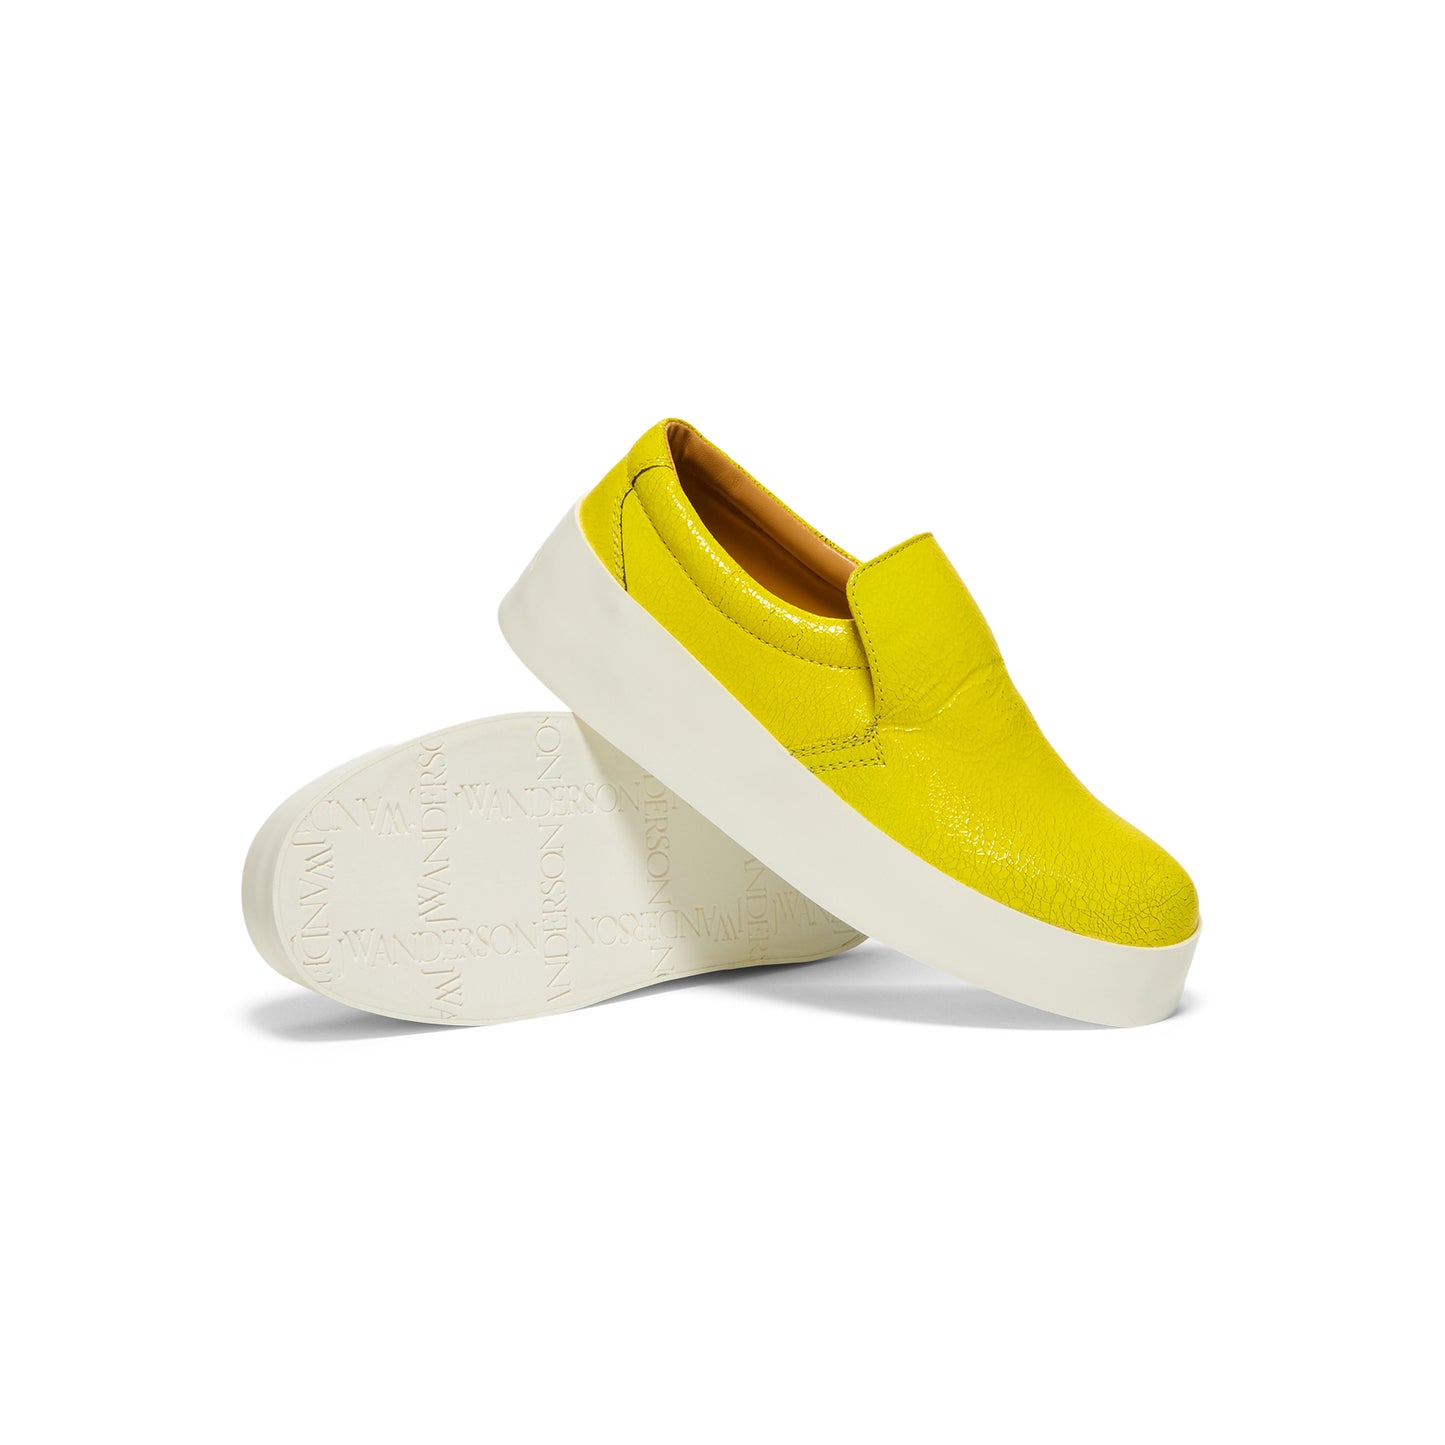 JW Anderson Cracked Leather Slip On (Bright Yellow)